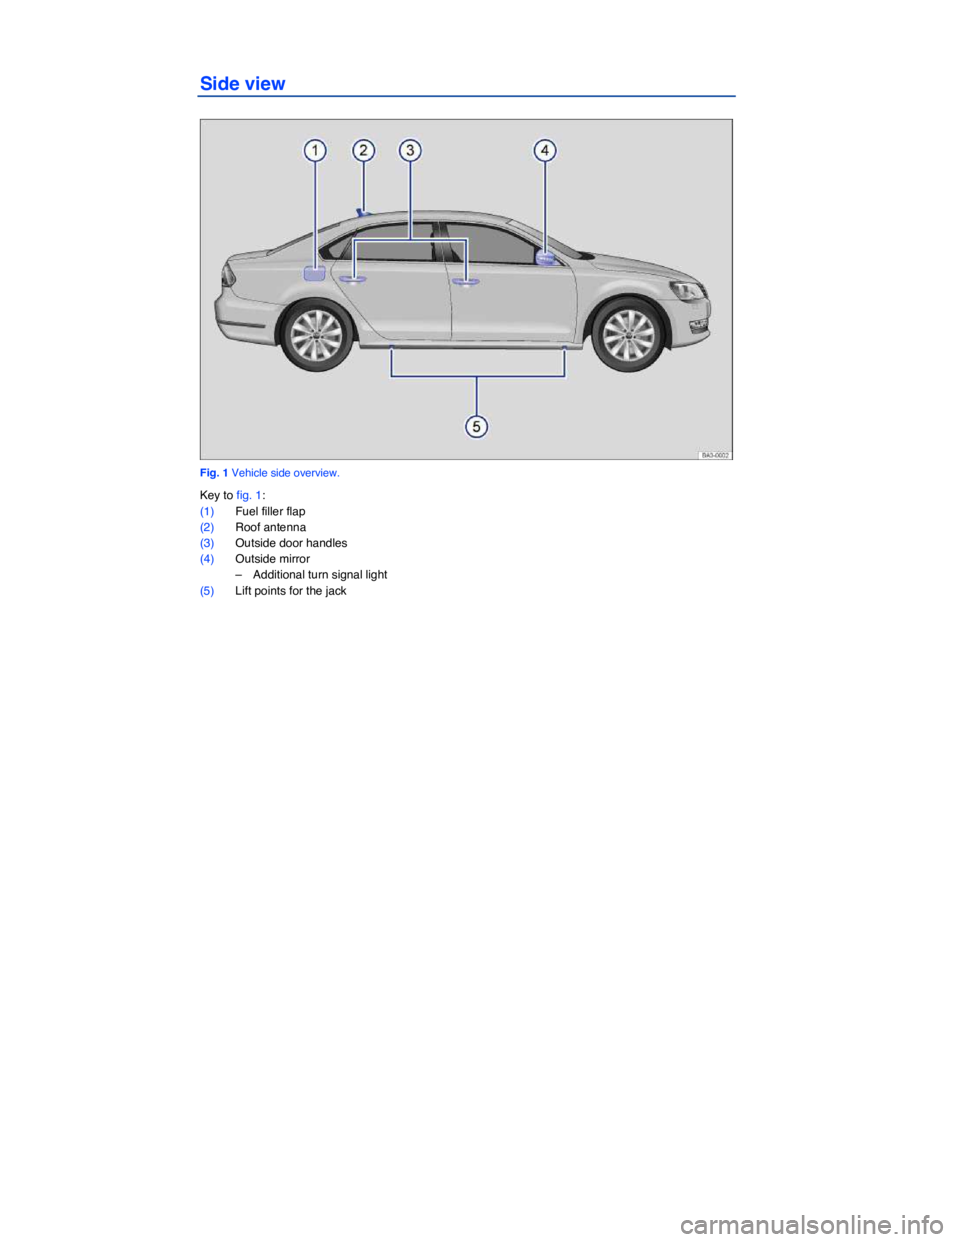 VOLKSWAGEN PASSAT 2011  Owners Manual  
Side view 
 
Fig. 1 Vehicle side overview. 
Key to fig. 1: 
(1) Fuel filler flap  
(2) Roof antenna  
(3) Outside door handles  
(4) Outside mirror  
–  Additional turn signal light  
(5) Lift poi